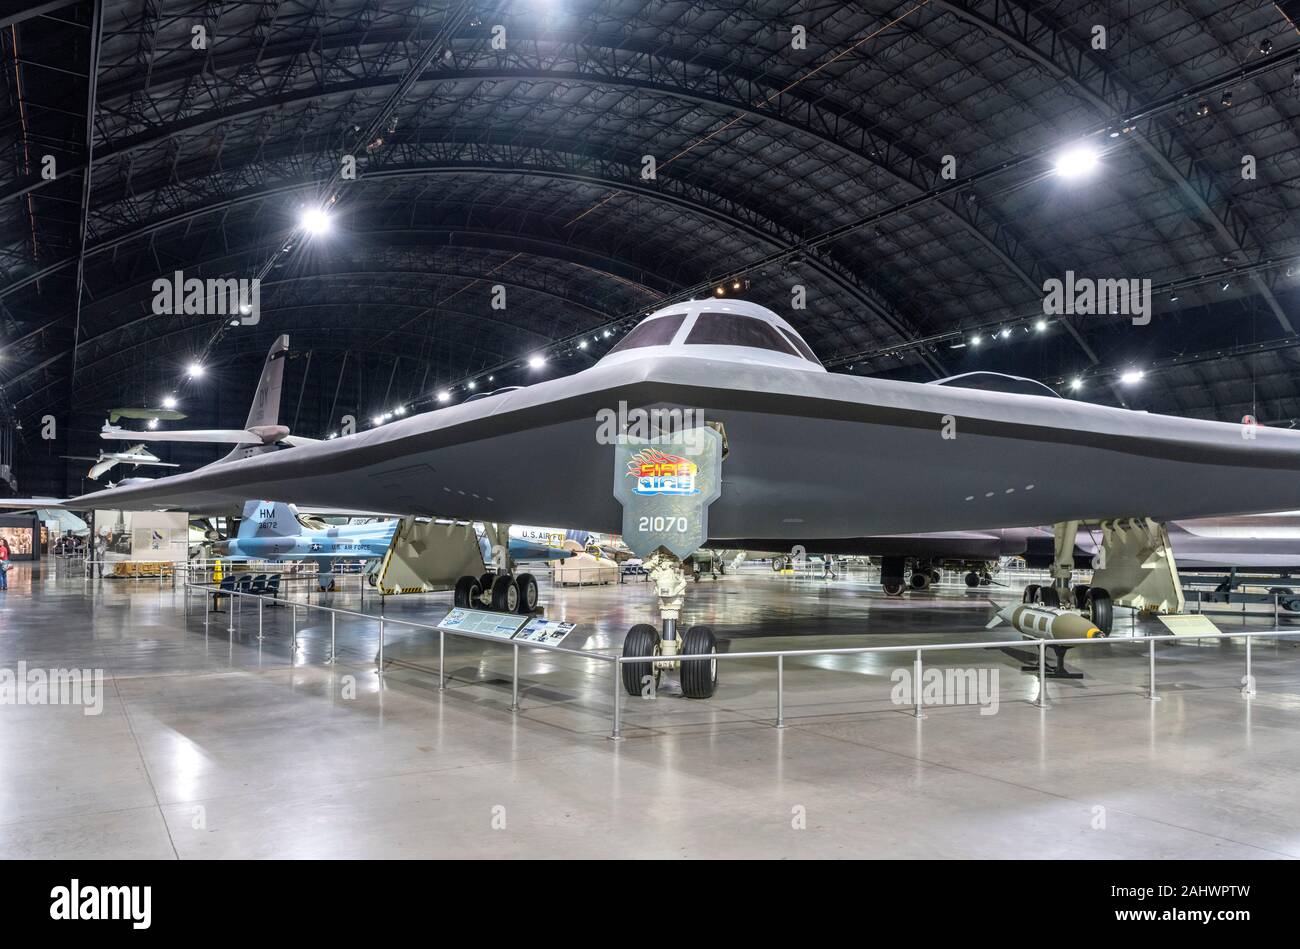 Northrop Grumman B-2 Spirit stealth bomber, National Museum of the United States Air Force (formerly the United States Air Force Museum), Dayton, Ohio, USA. Stock Photo